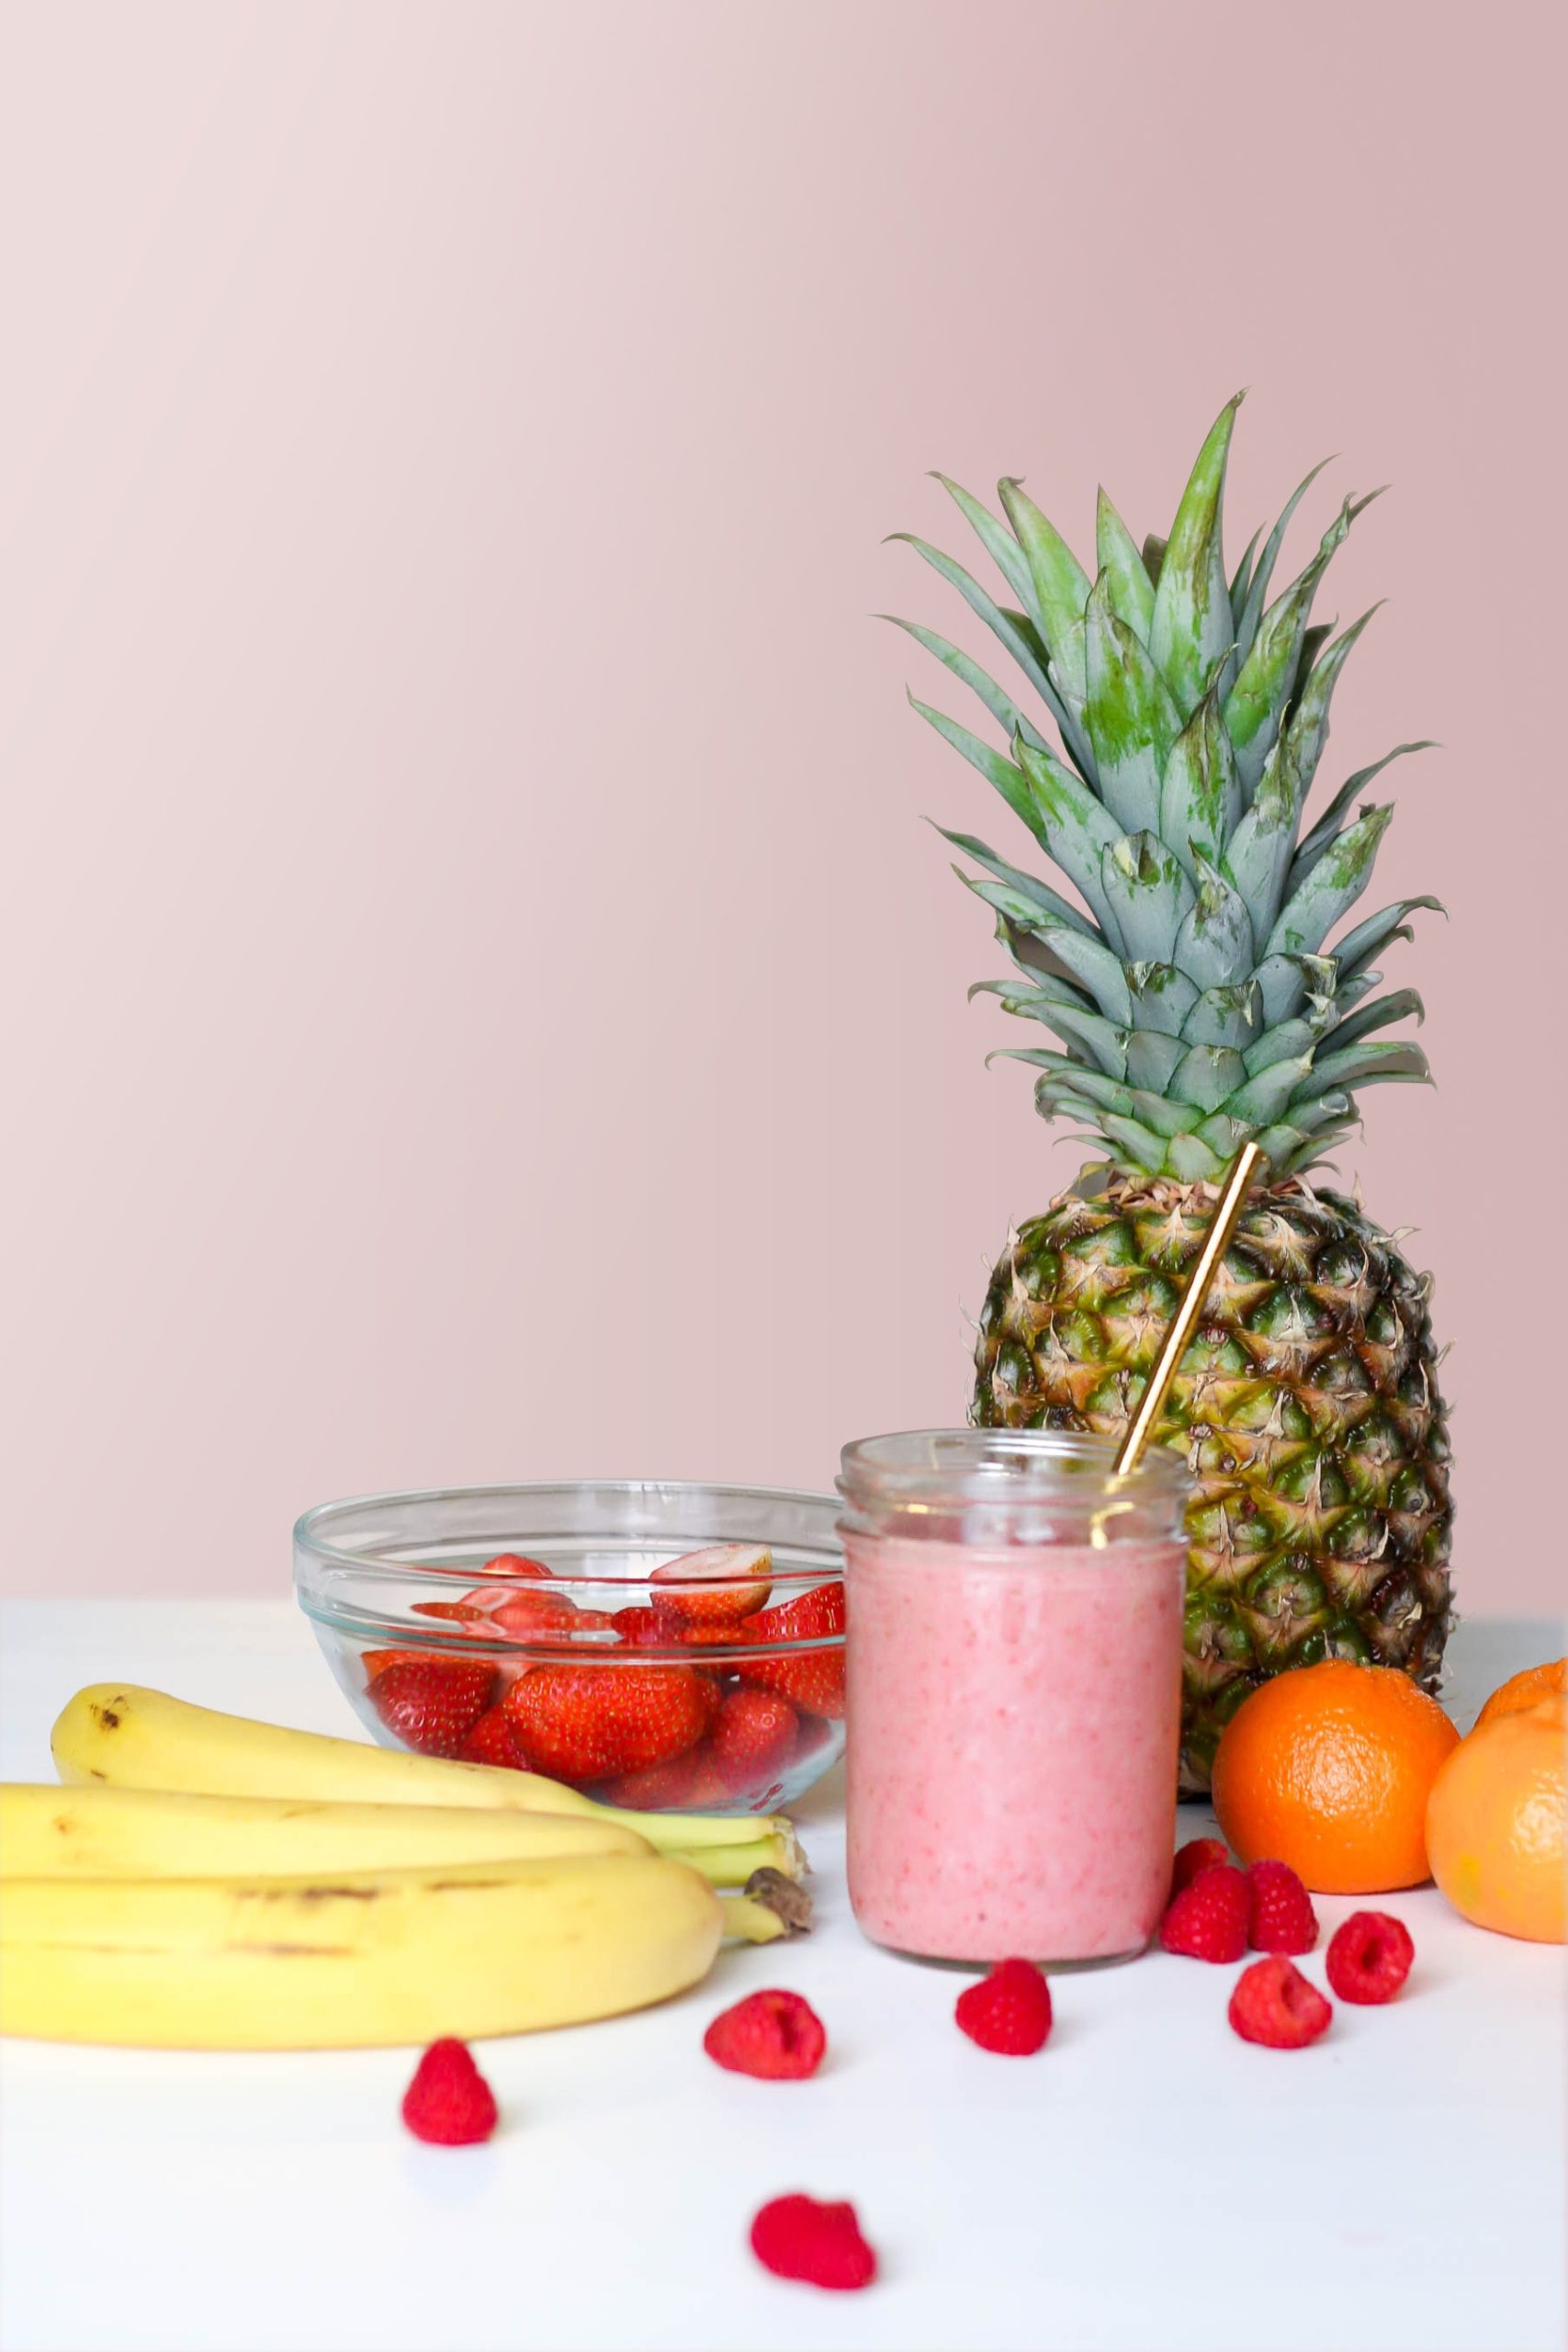 Fruit smoothie with strawberries, pineapple, banana, oranges, and respberries